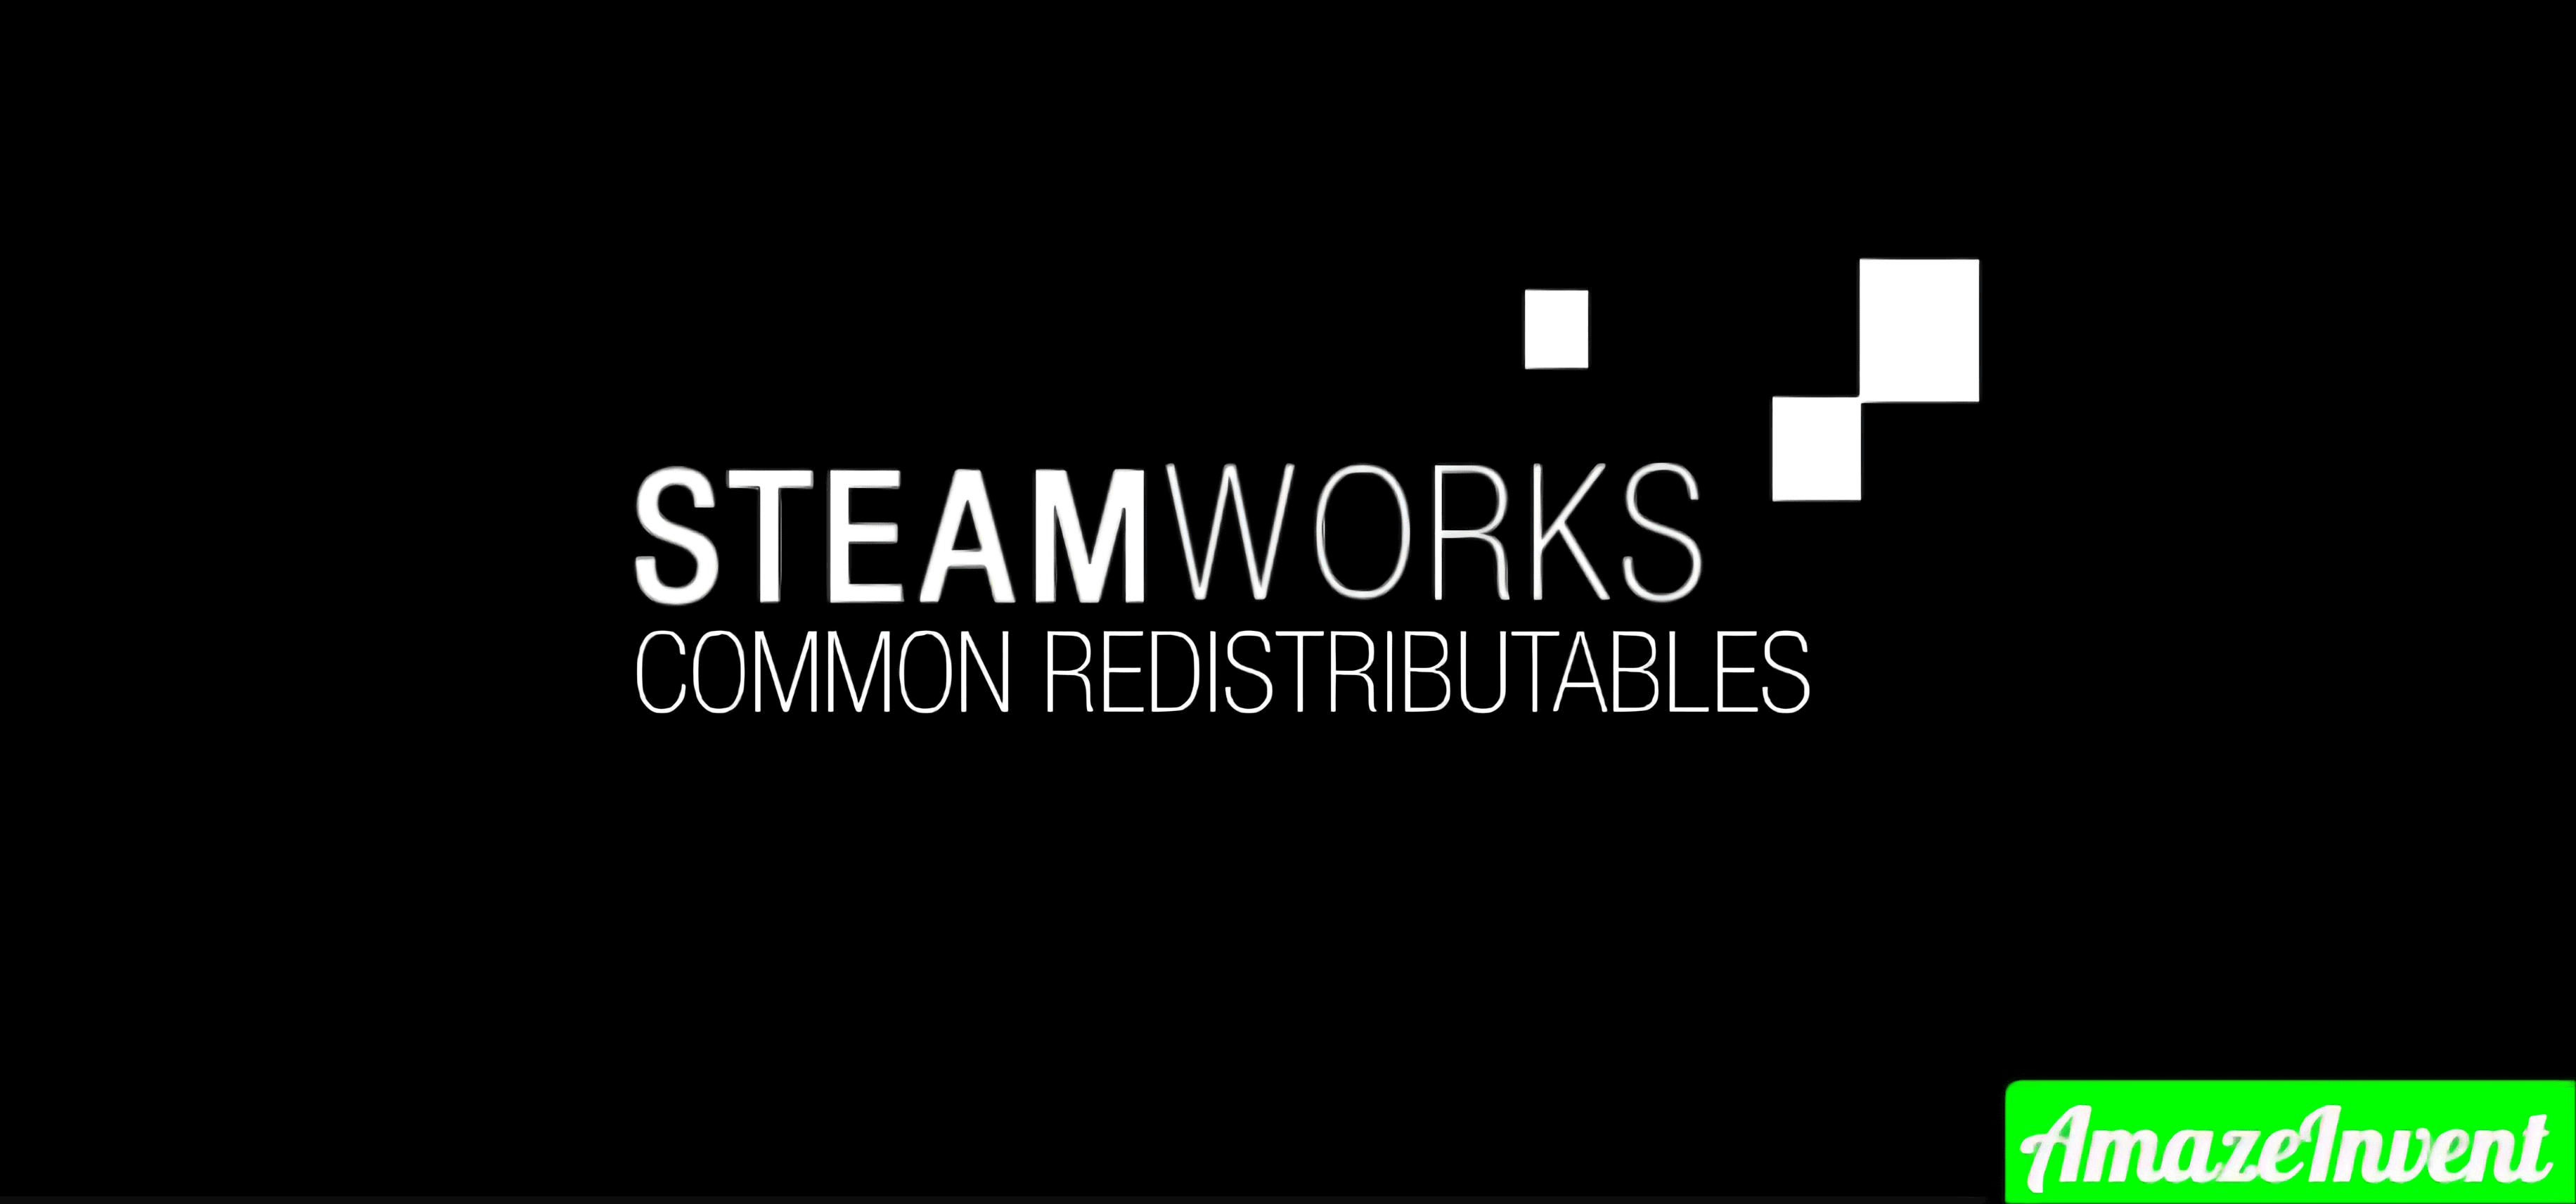 What is the Steamworks Common Redistributables? alrigh.com. 